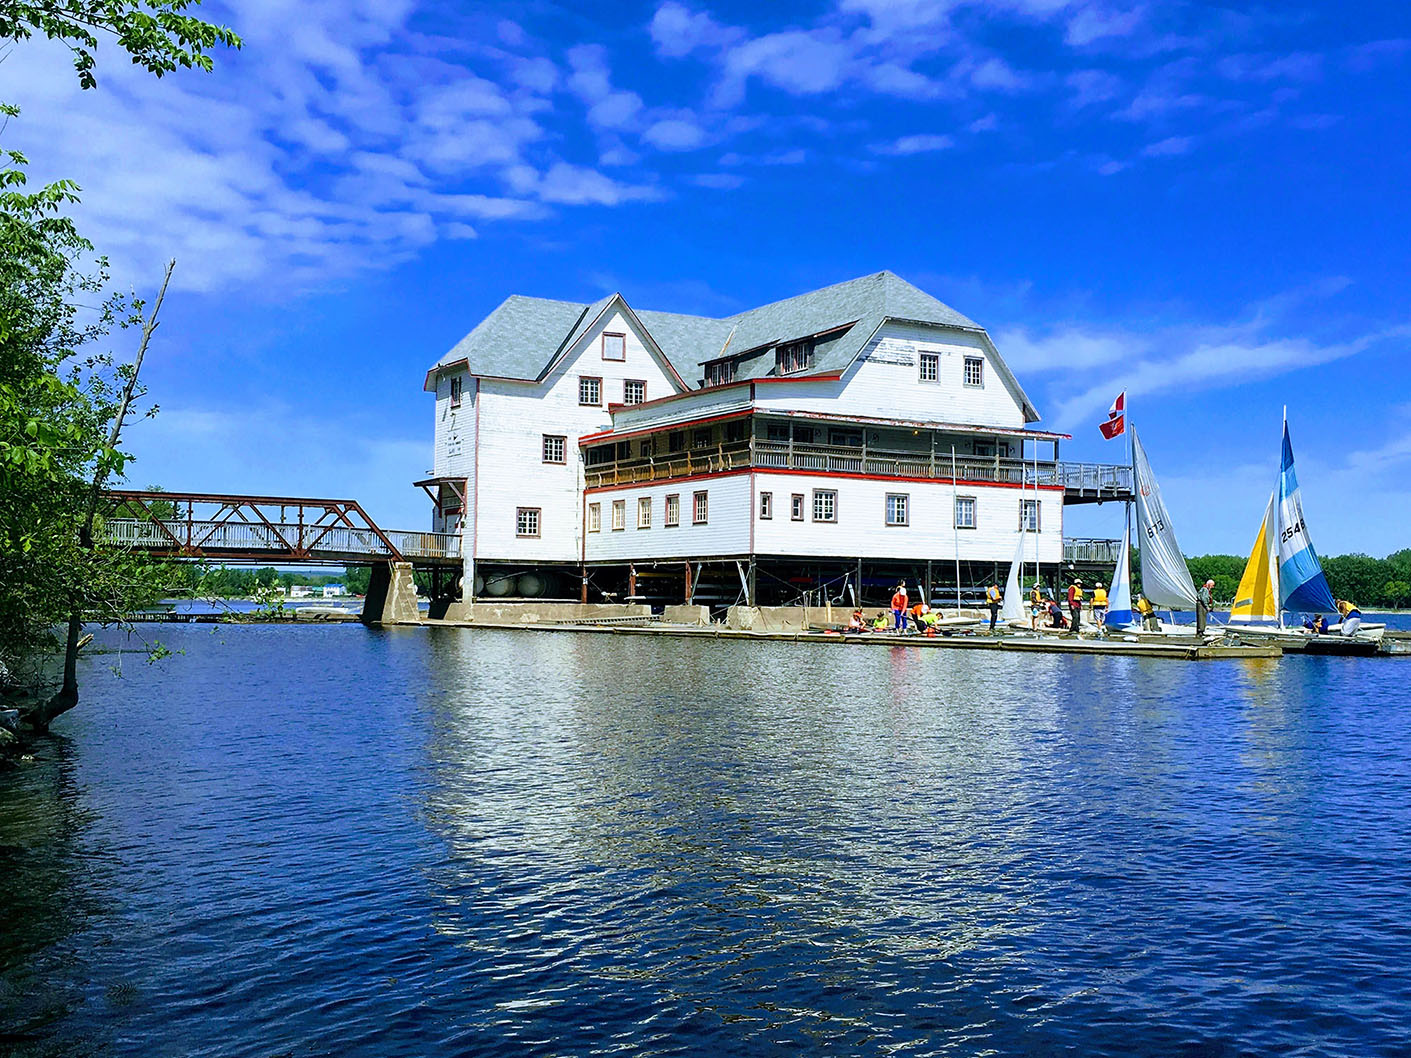 Reconnecting with the Ottawa River: An Historic Boathouse Revitalization